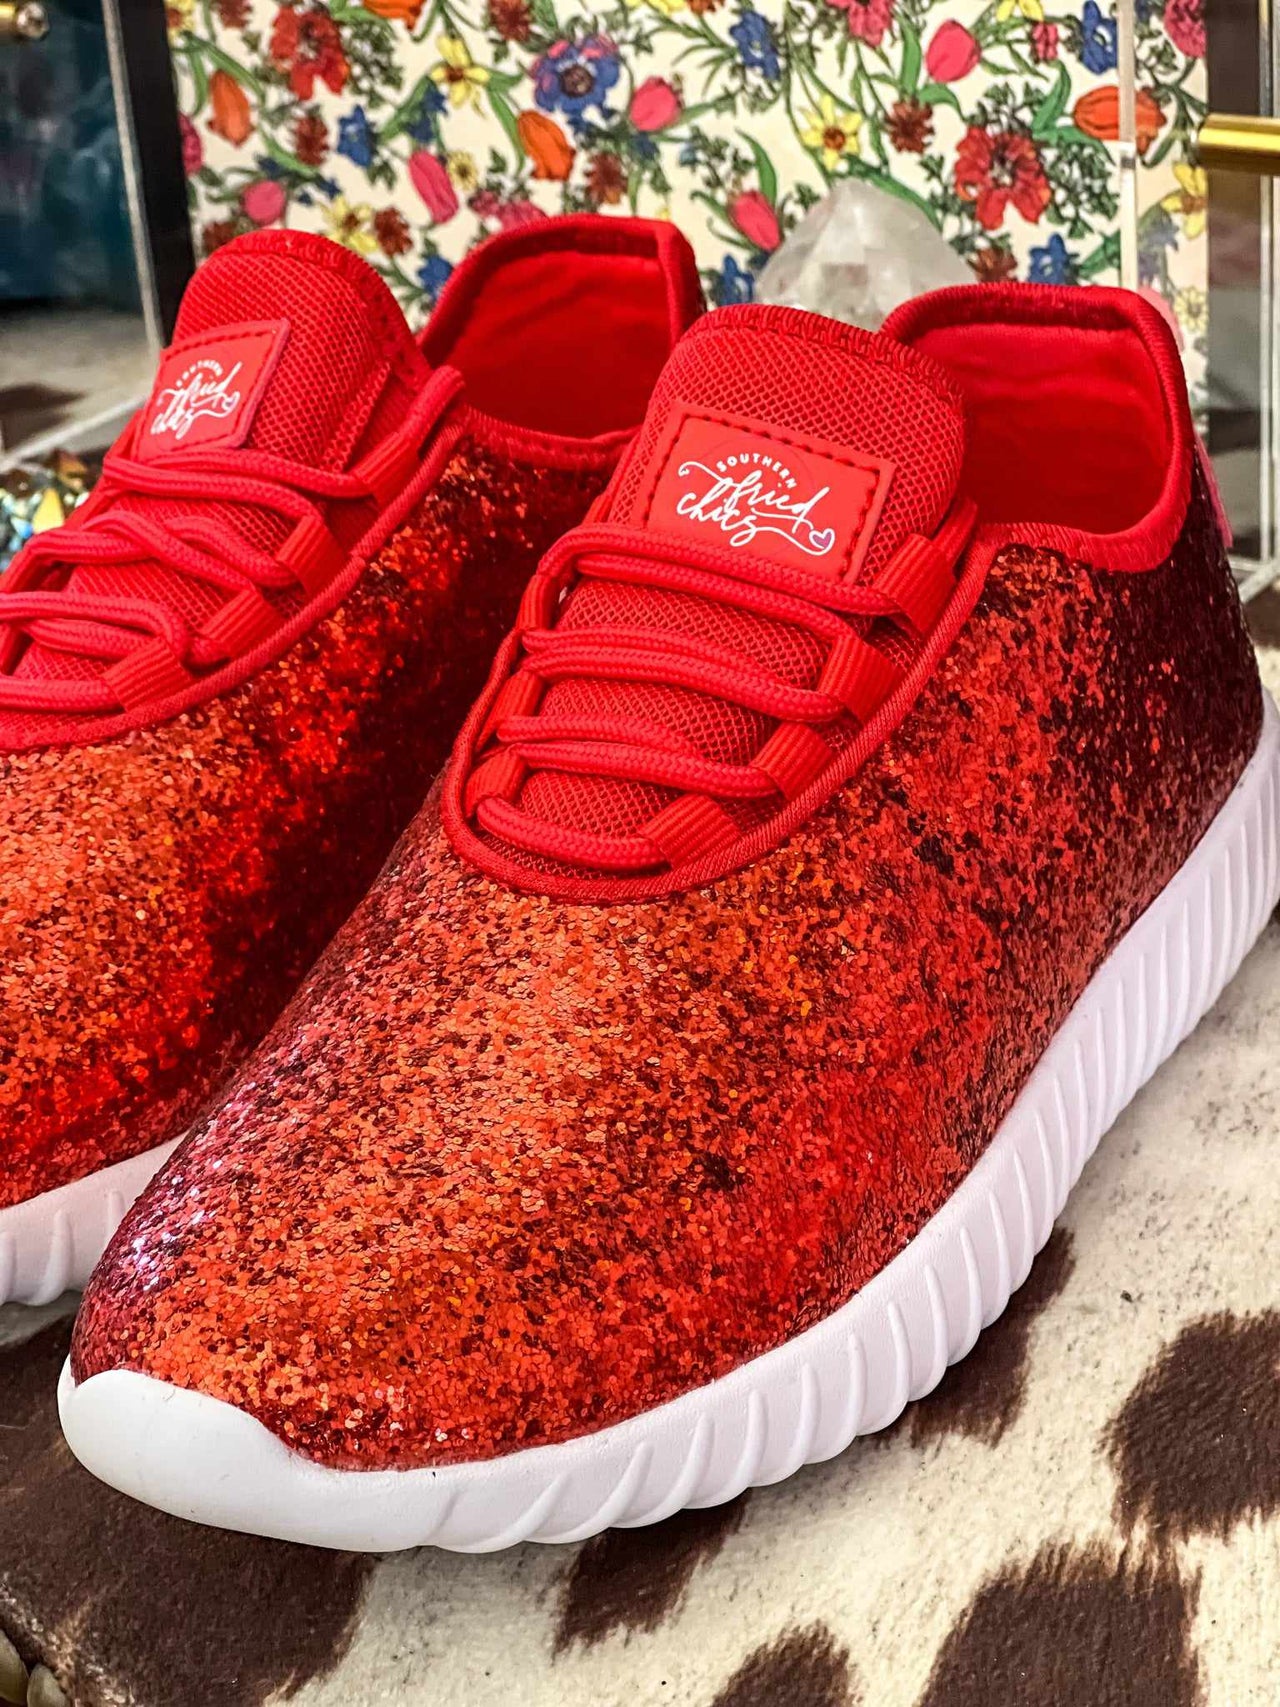 Glitter Bomb Sneakers - Red on White